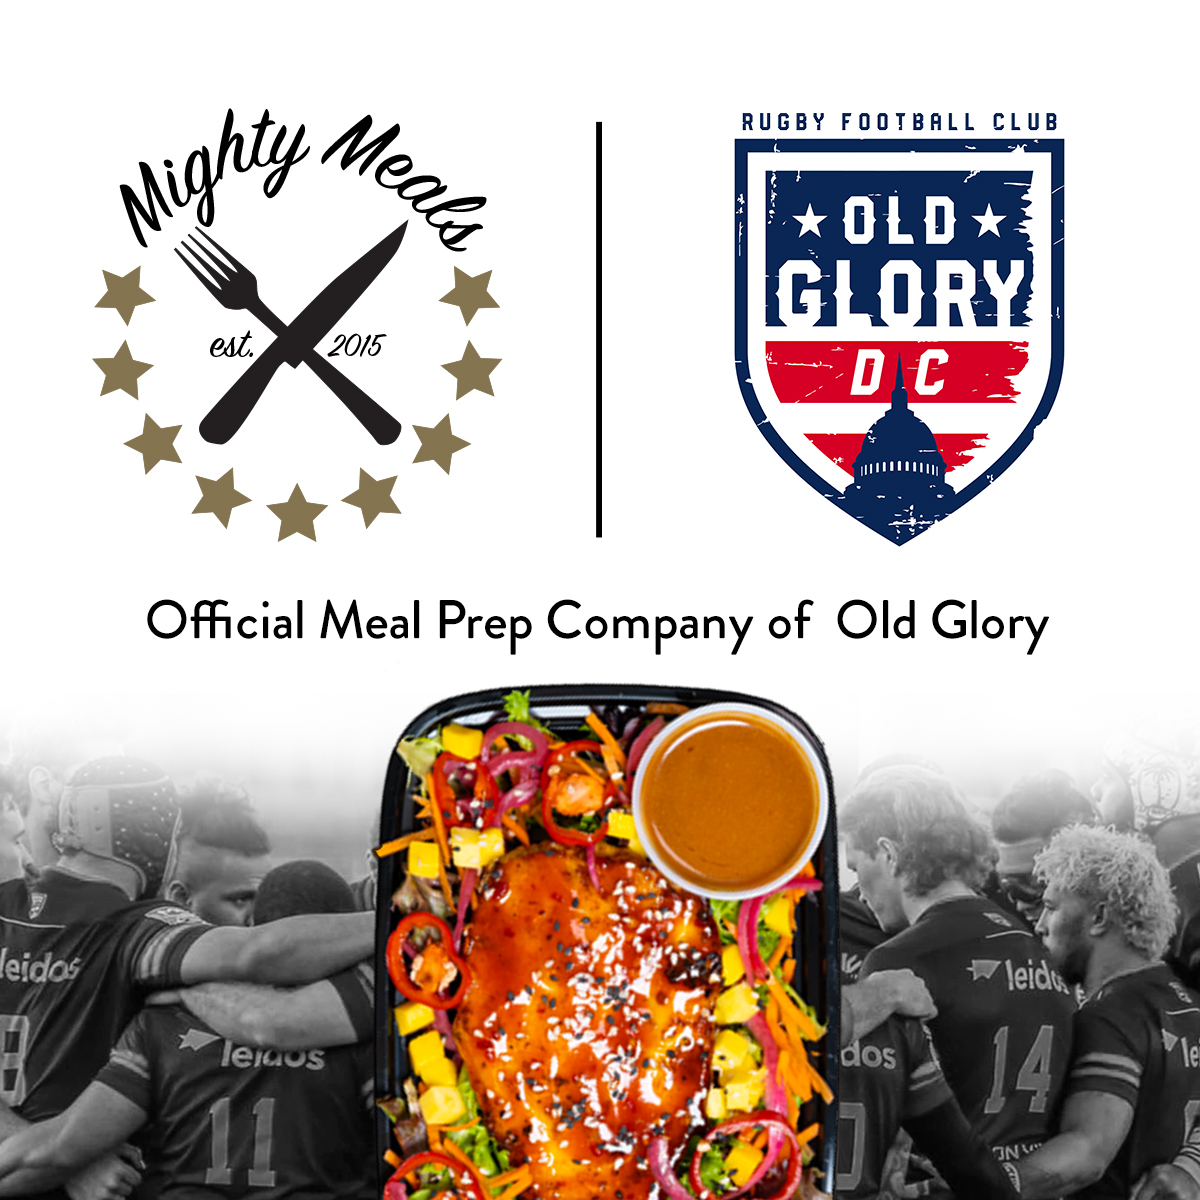 Mightymeals Is The Official Meal Prep Company Of Old Glory Dc